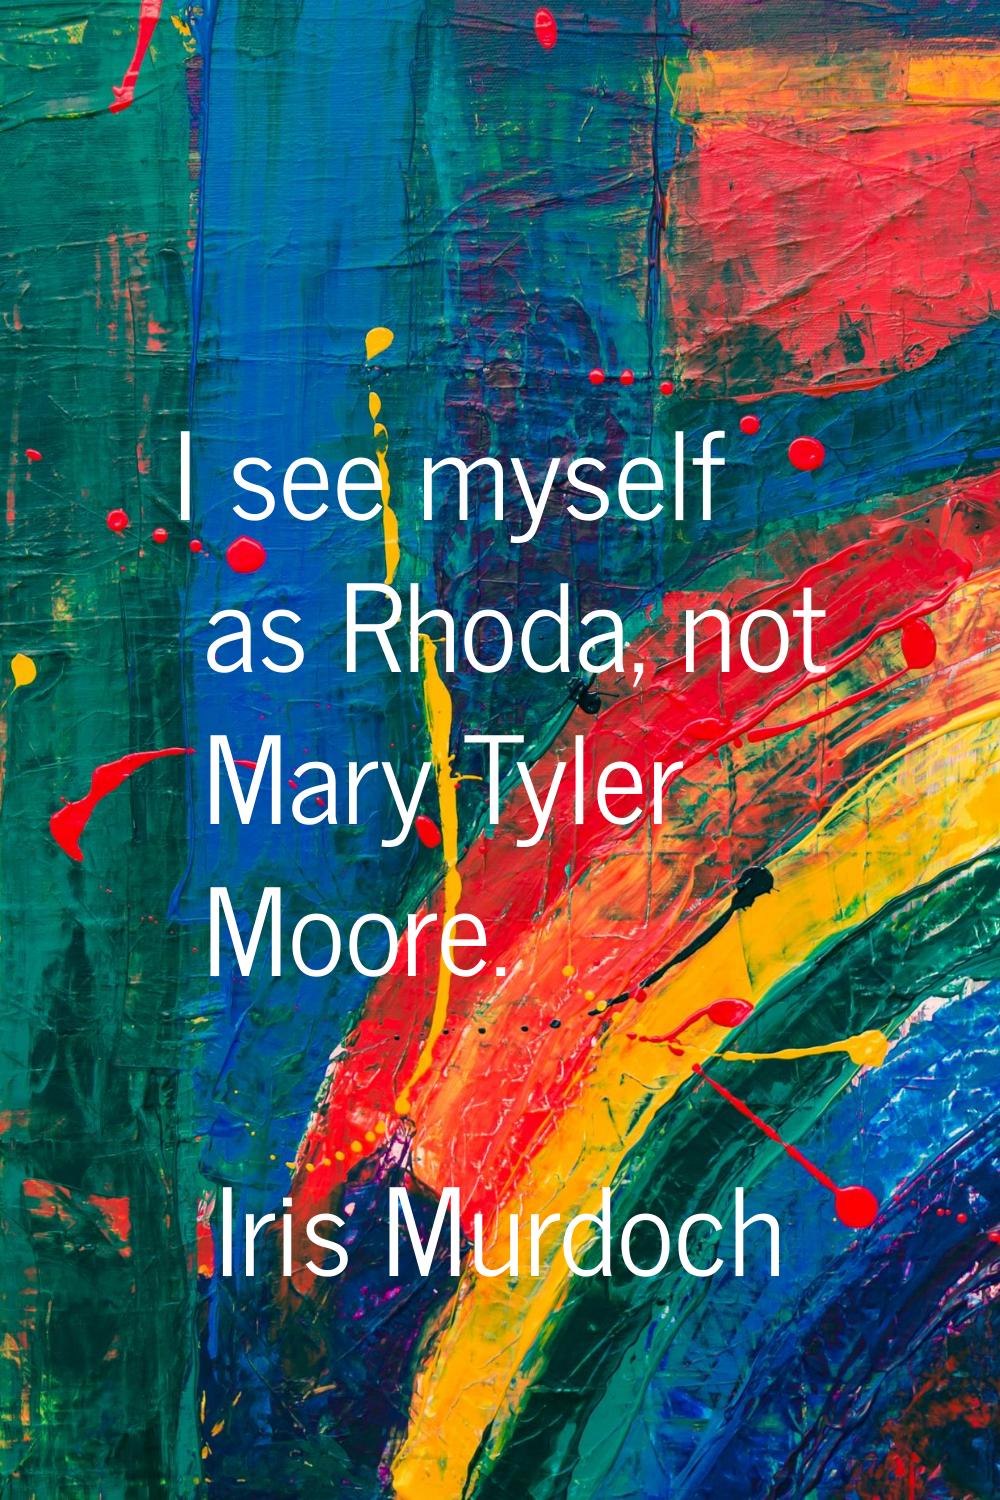 I see myself as Rhoda, not Mary Tyler Moore.